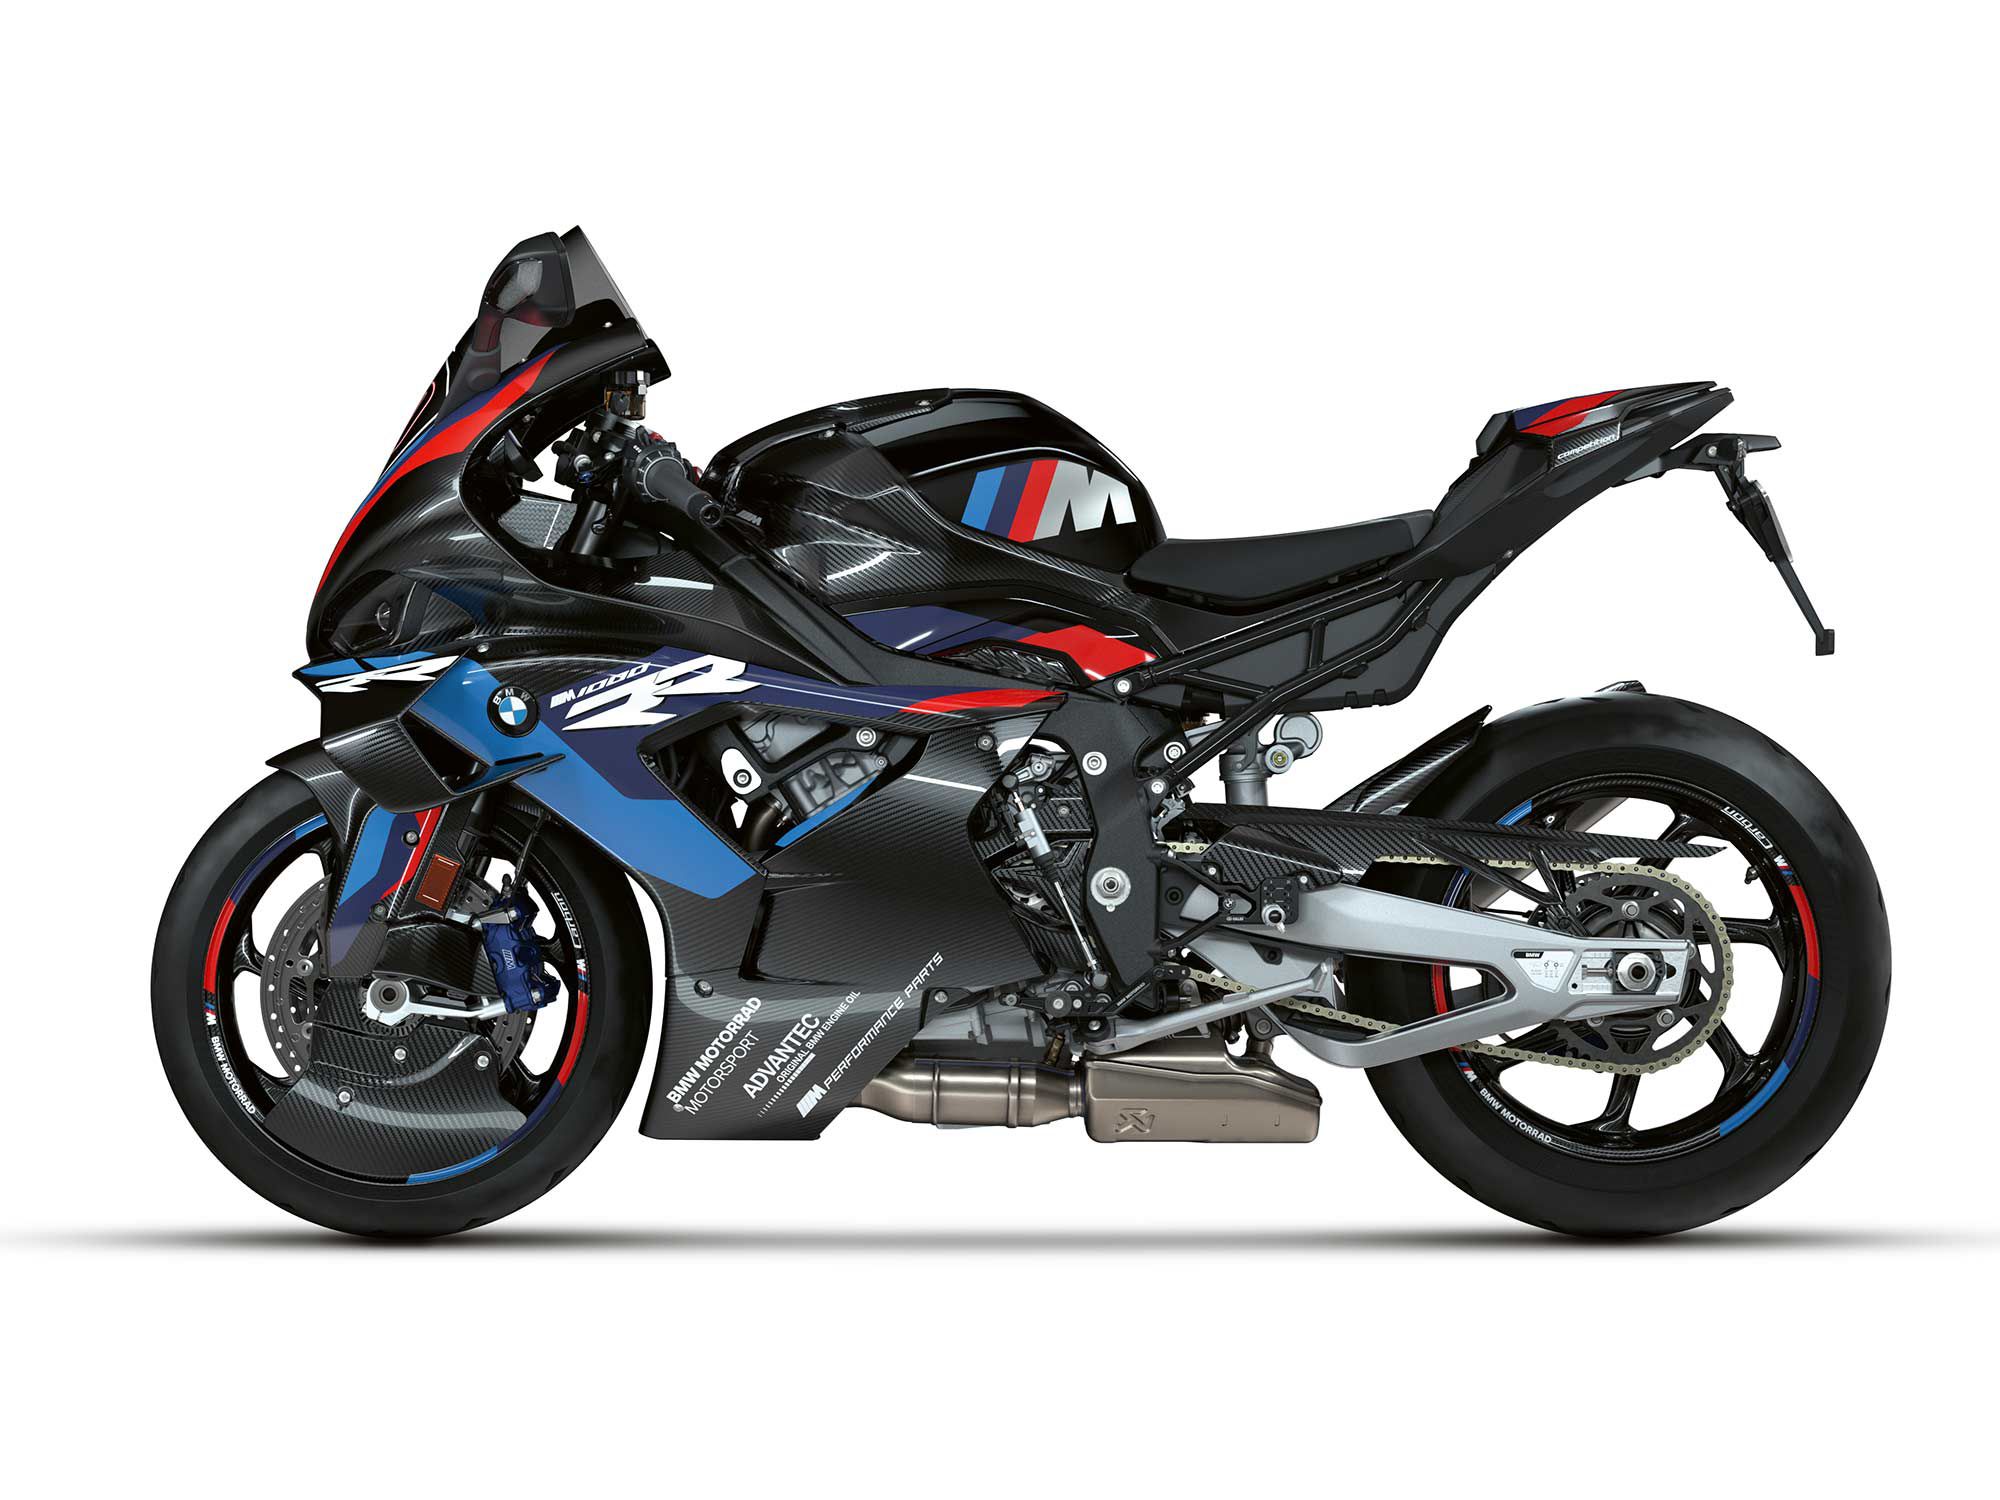 The BMW M 1000 RR, with M Competition trick bits like the carbon fiber brake cooling air ducts integrated with the mudguards.